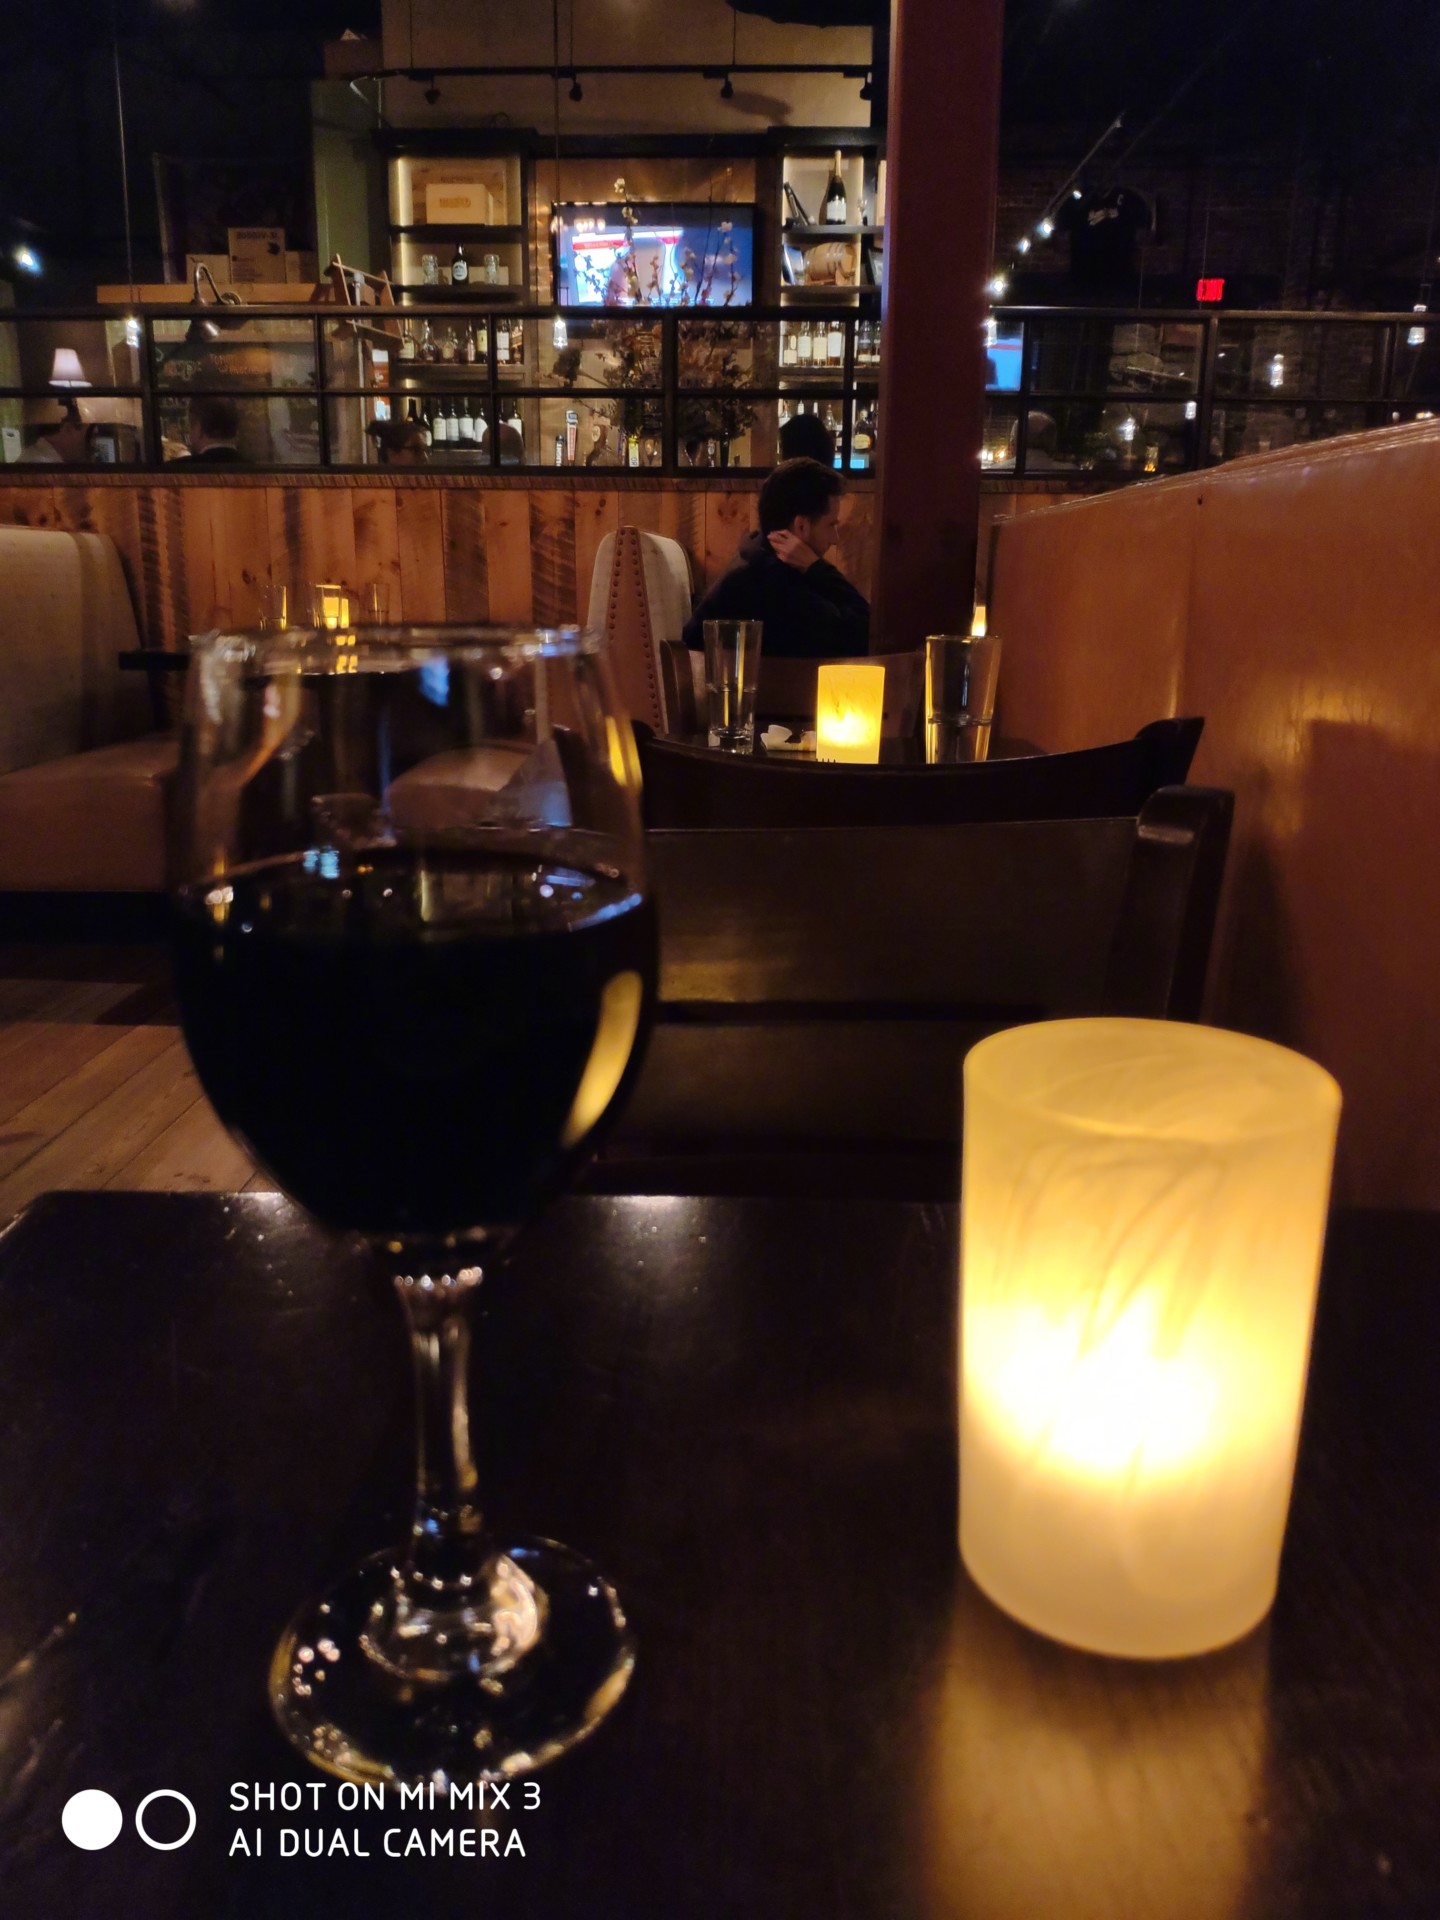 A glass of wine and a candle shot in a restaurant by the Mi Mix 3.